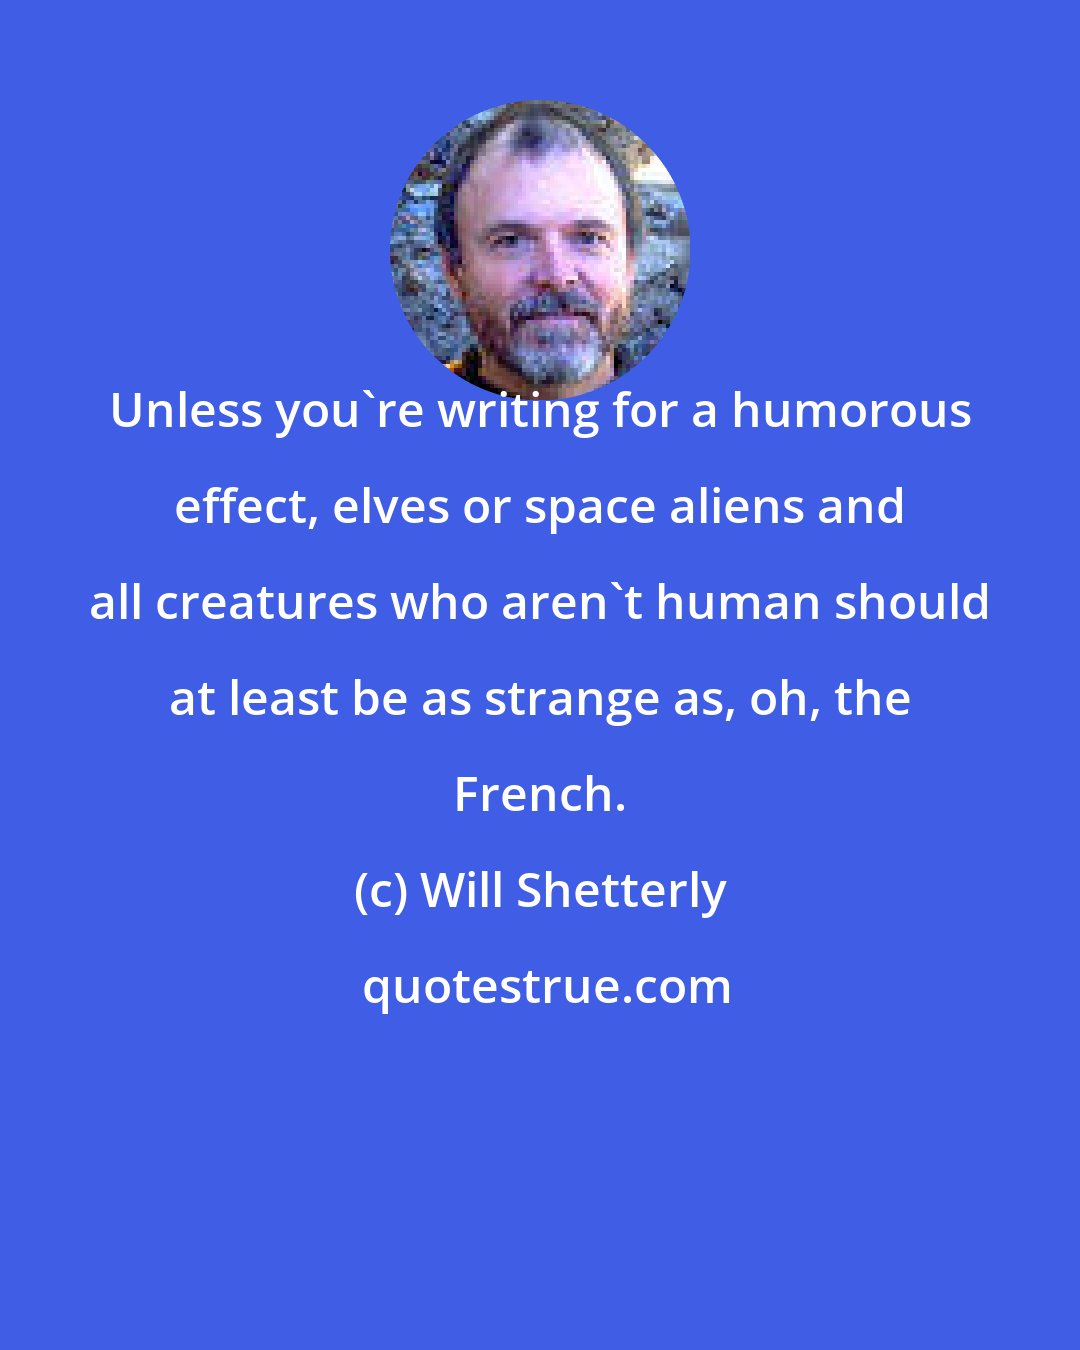 Will Shetterly: Unless you're writing for a humorous effect, elves or space aliens and all creatures who aren't human should at least be as strange as, oh, the French.